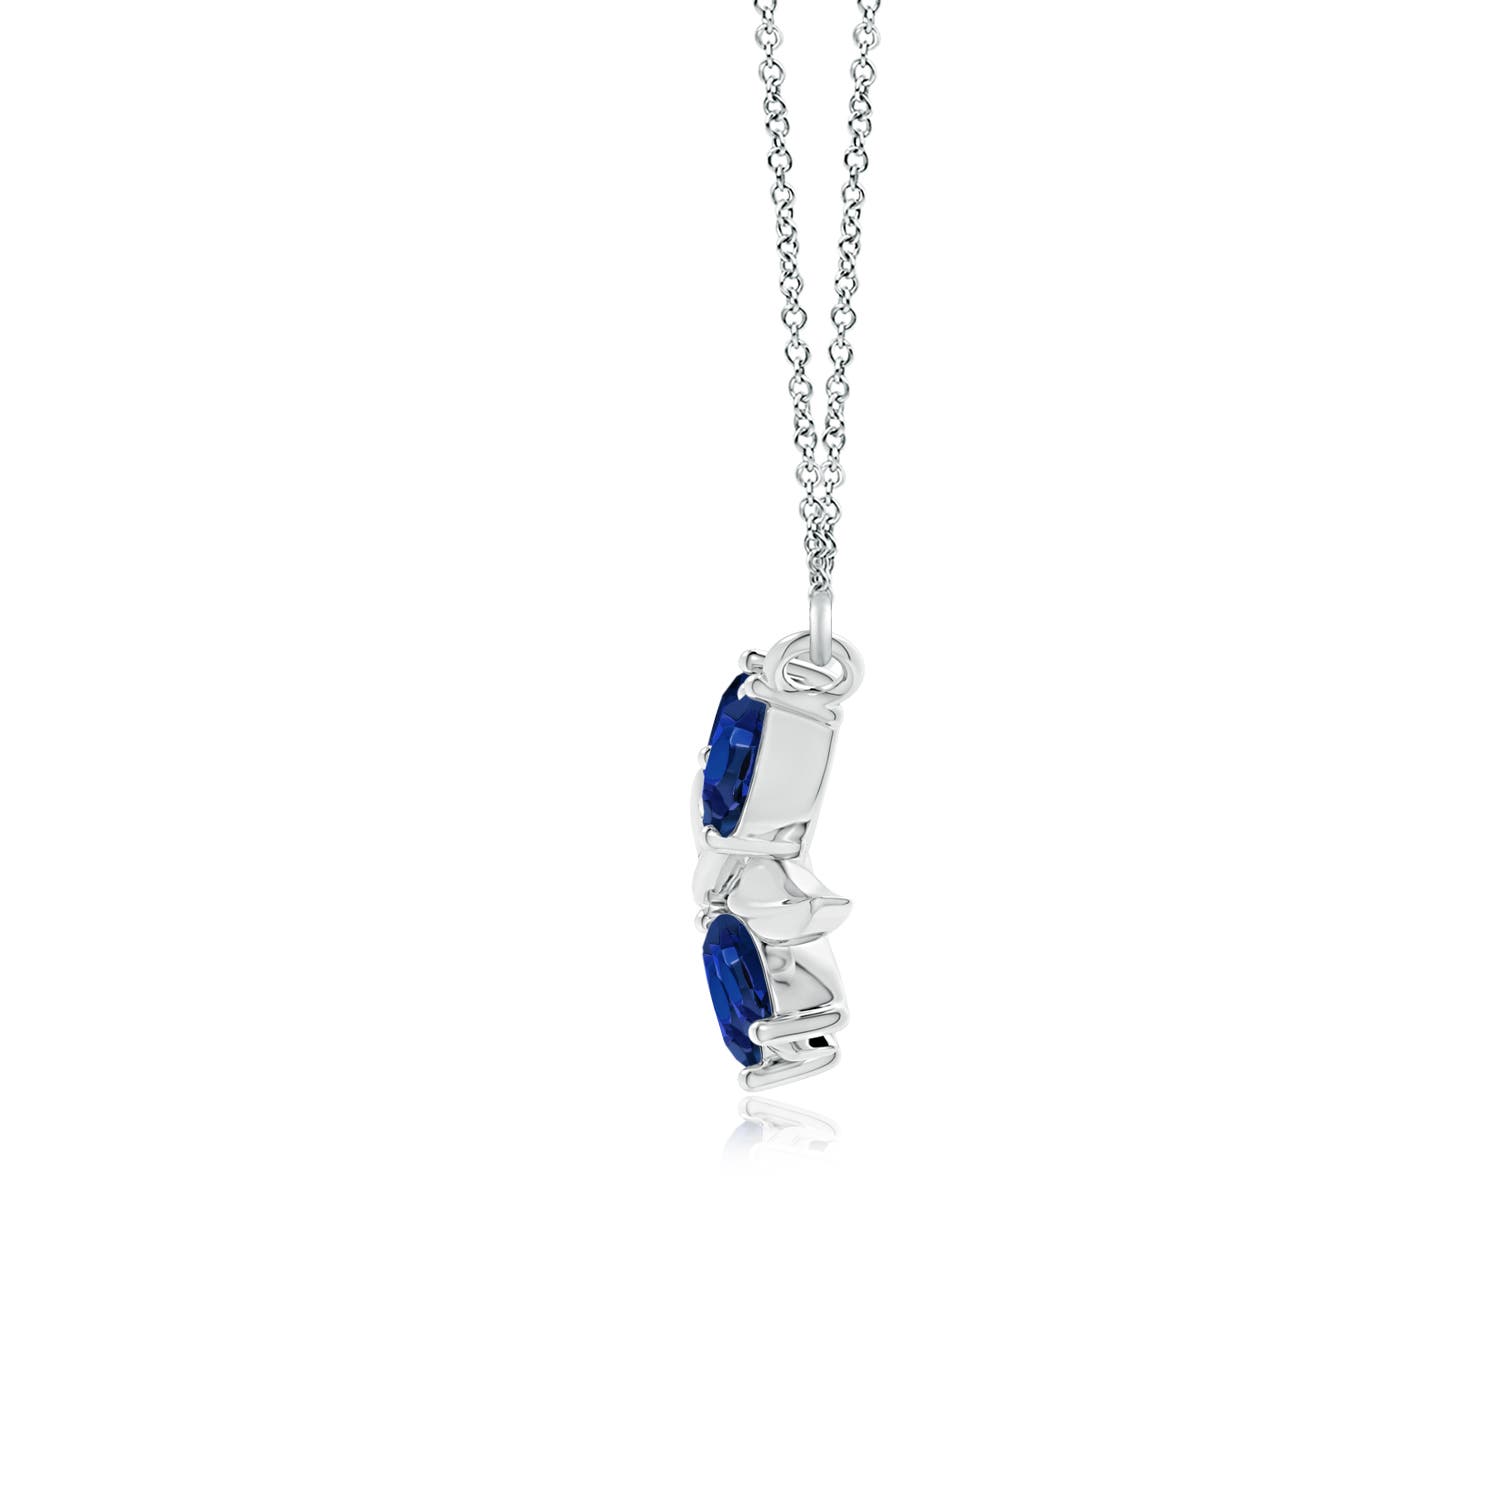 AA - Blue Sapphire / 1.25 CT / 14 KT White Gold